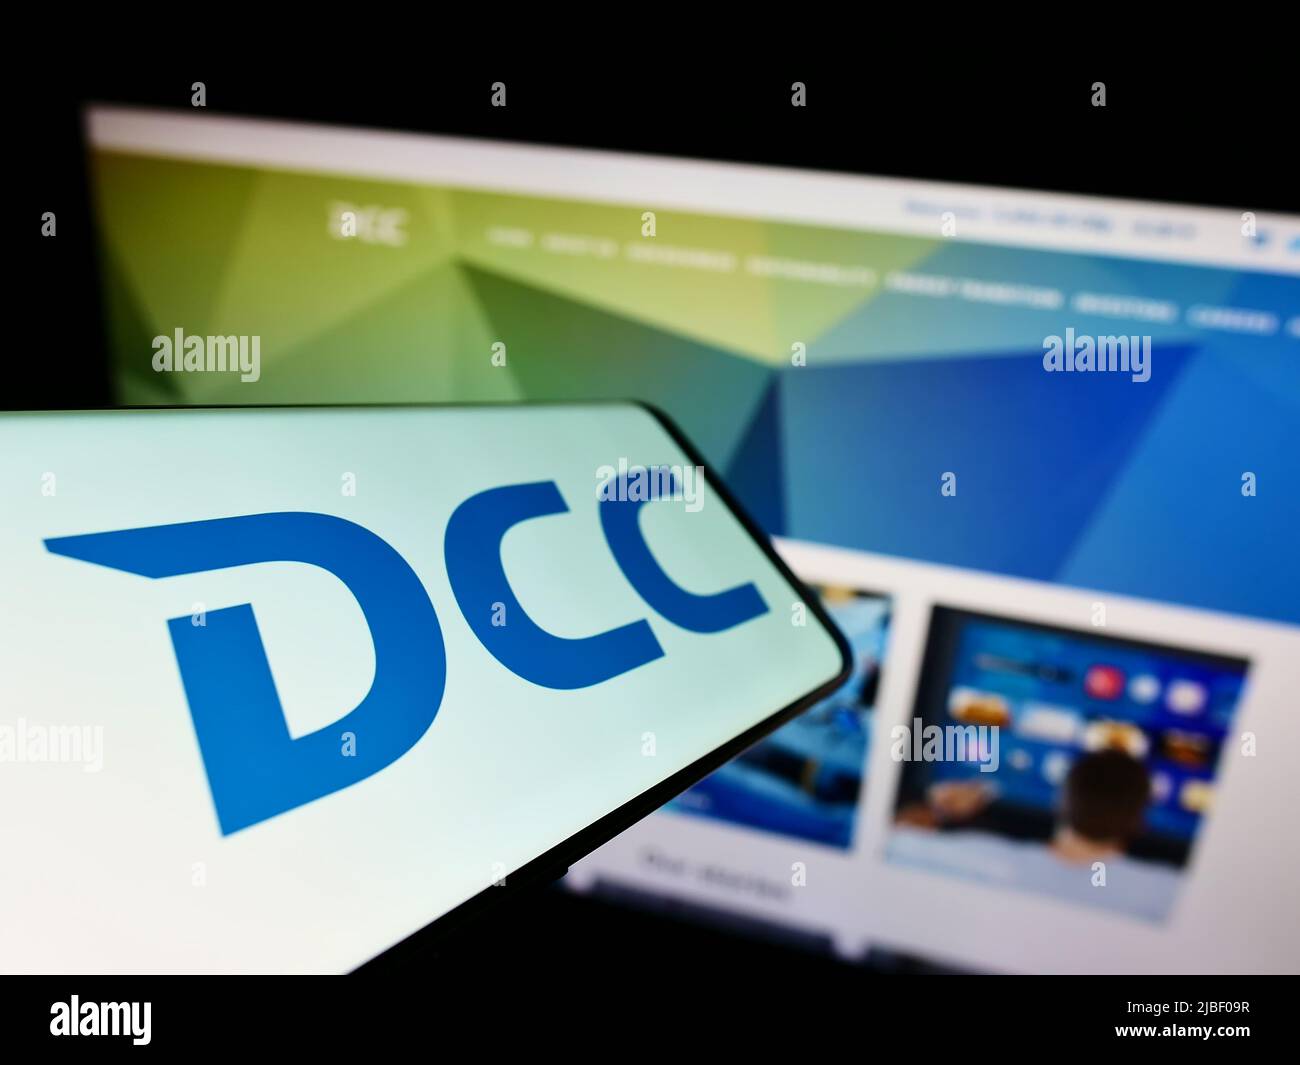 Smartphone with logo of Irish sales and marketing company DCC plc on screen in front of business website. Focus on center-left of phone display. Stock Photo